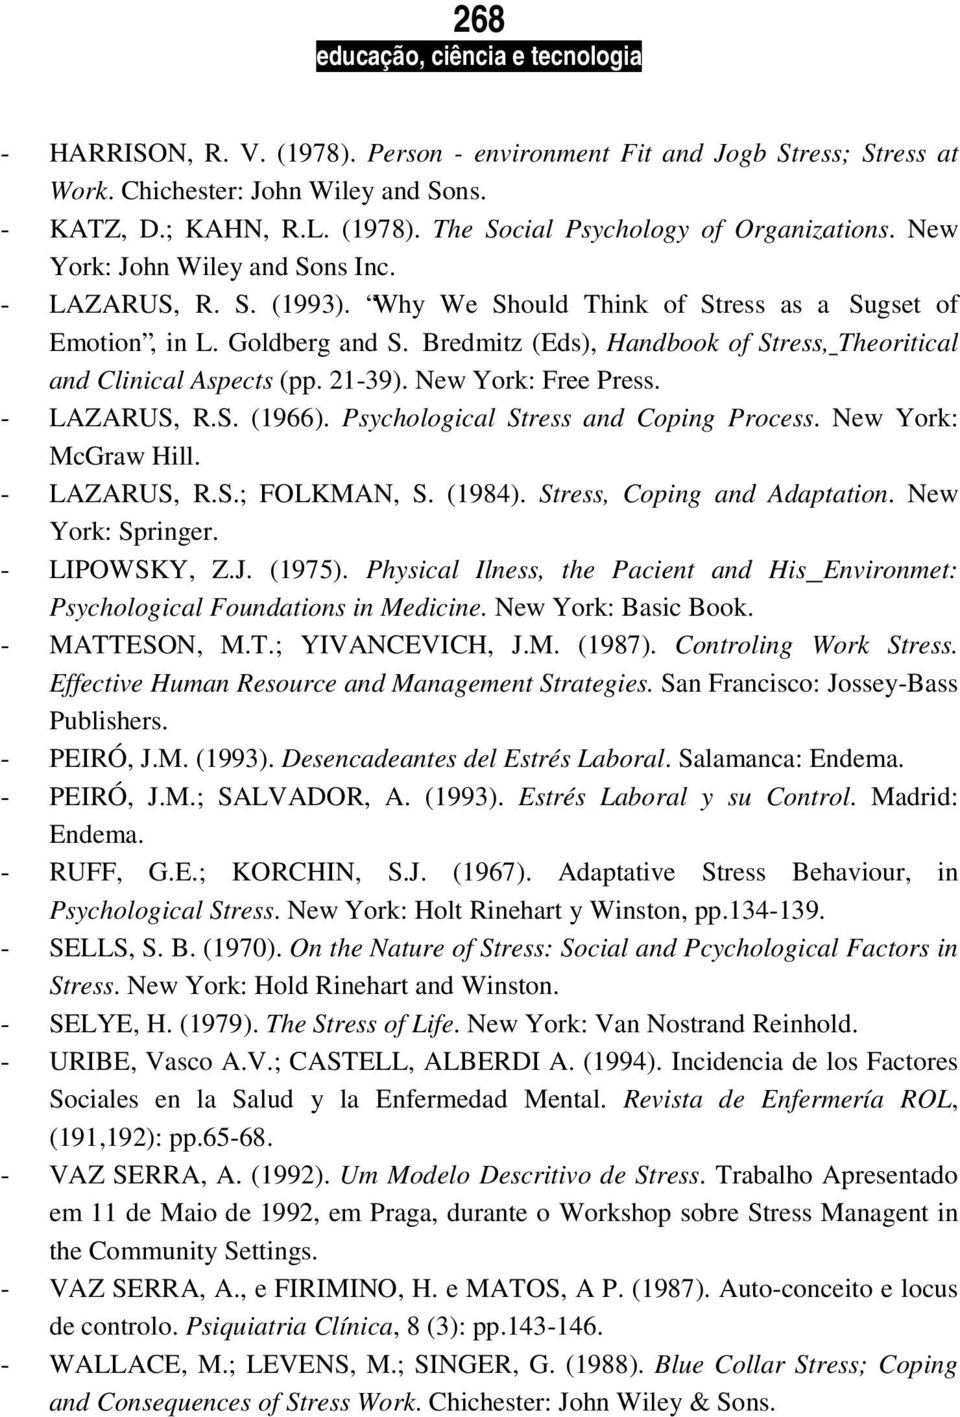 Bredmitz (Eds), Handbook of Stress, Theoritical and Clinical Aspects (pp. 21-39). New York: Free Press. - LAZARUS, R.S. (1966). Psychological Stress and Coping Process. New York: McGraw Hill.